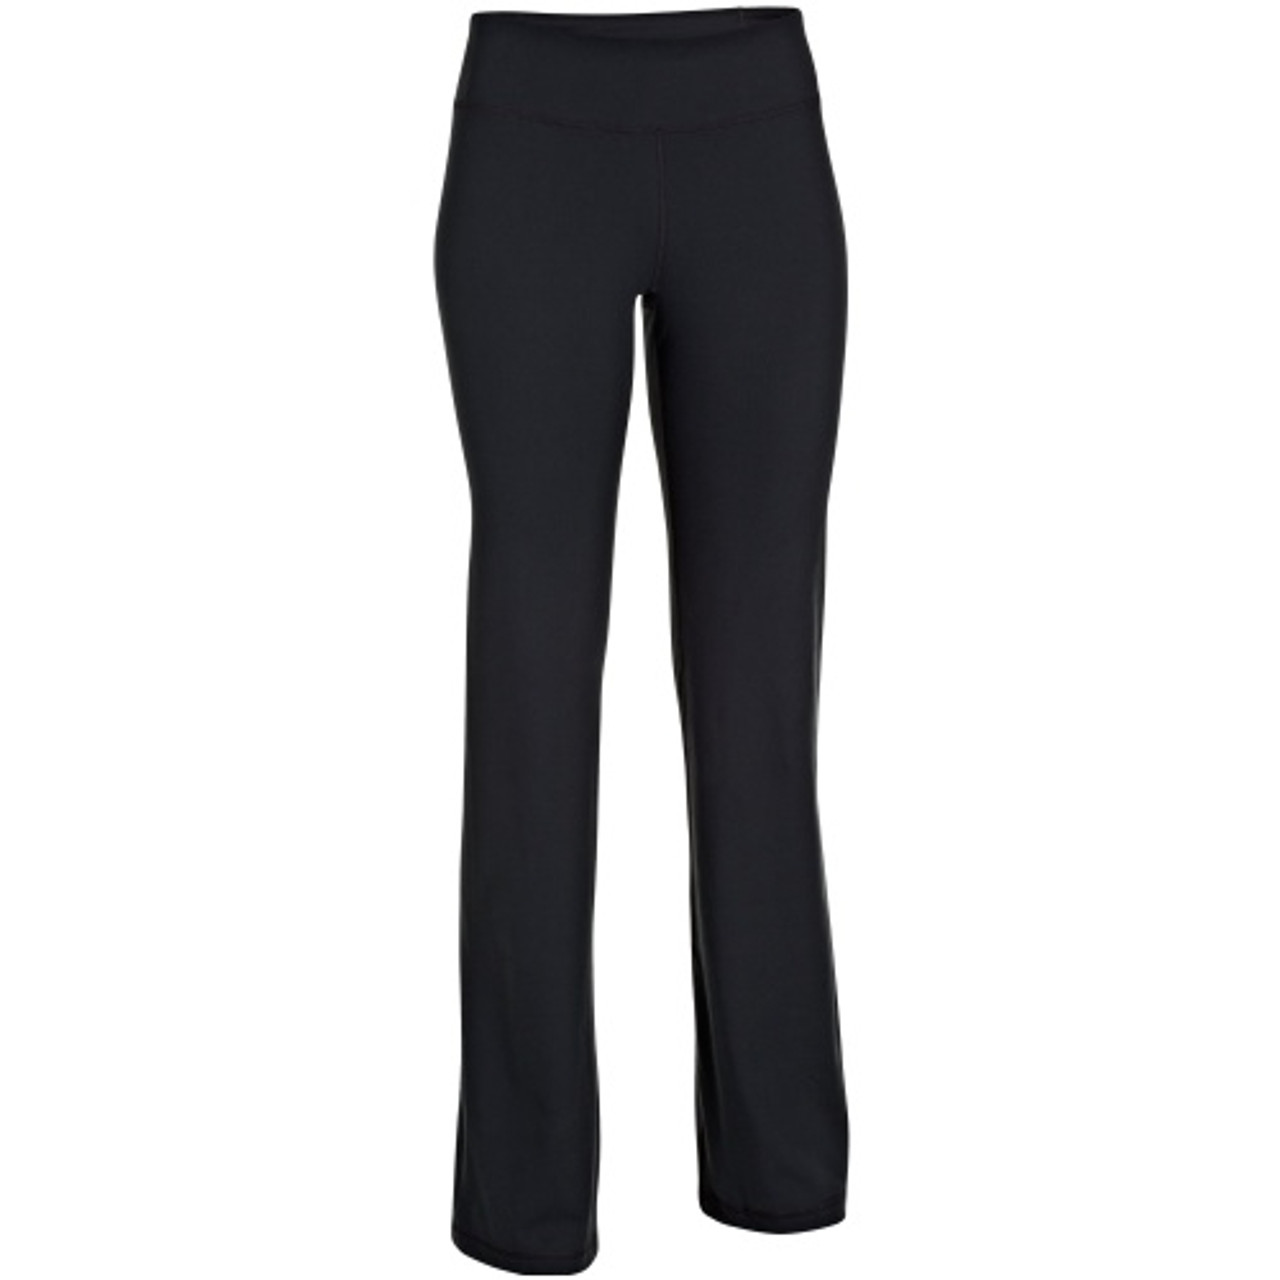 Under Armour Pants for Women online - Buy now at